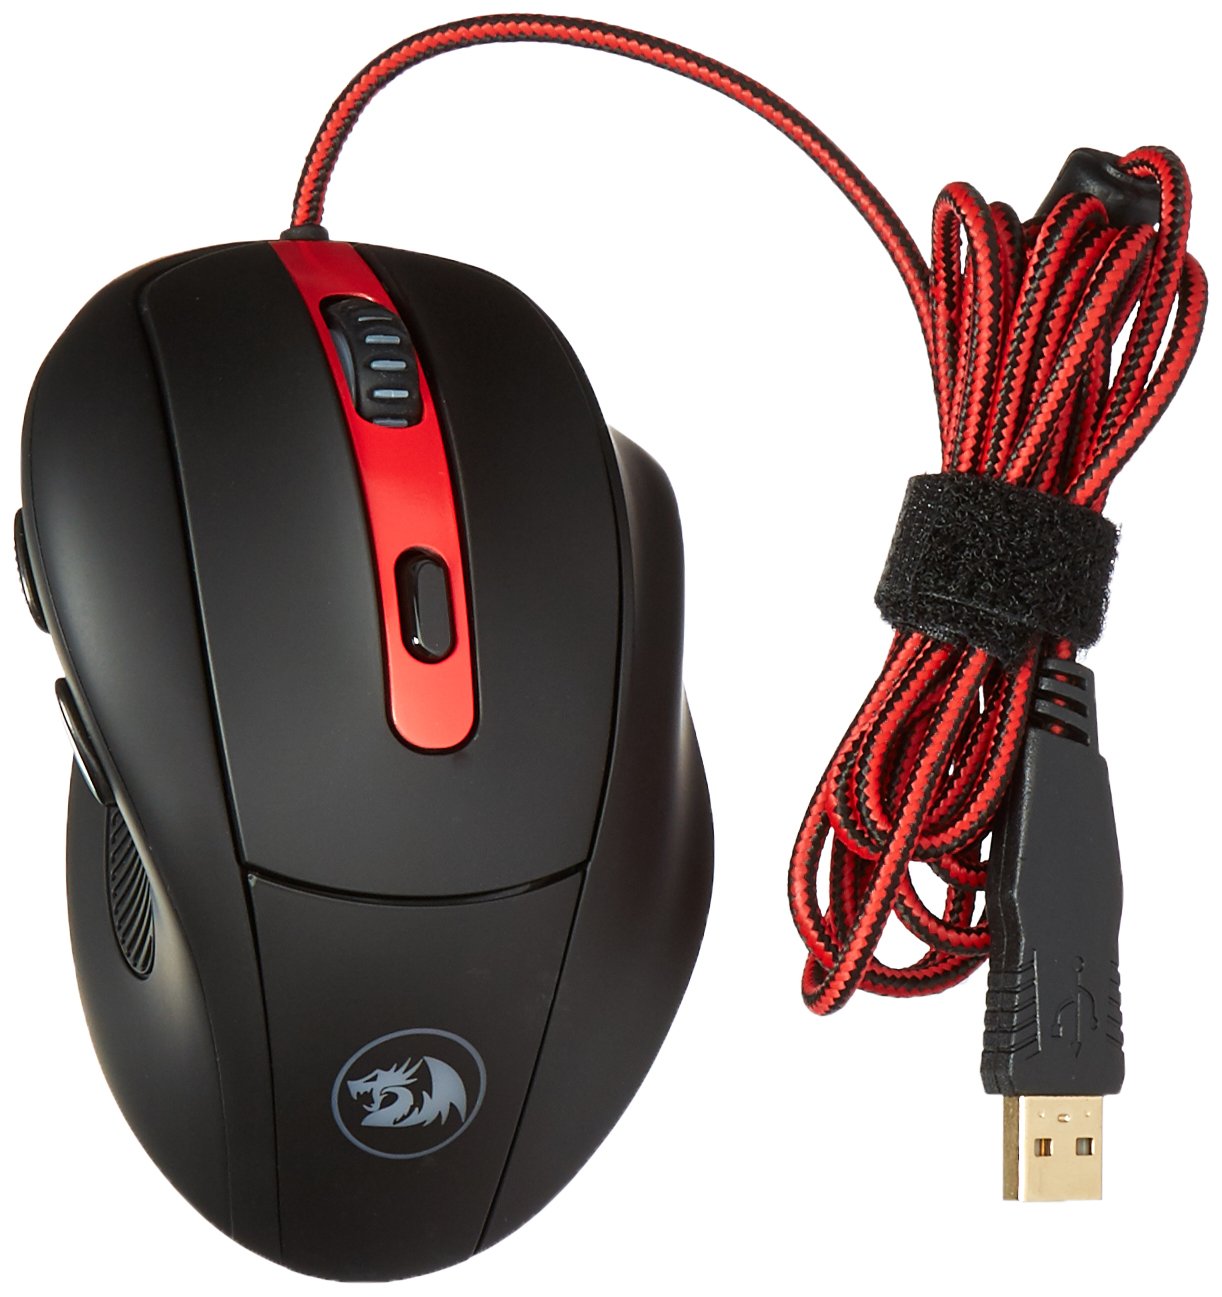 Redragon M605 Smilodon 2000 DPI, 6 Buttons, LED Backlit, Wired Optical Gaming Mouse (Black)